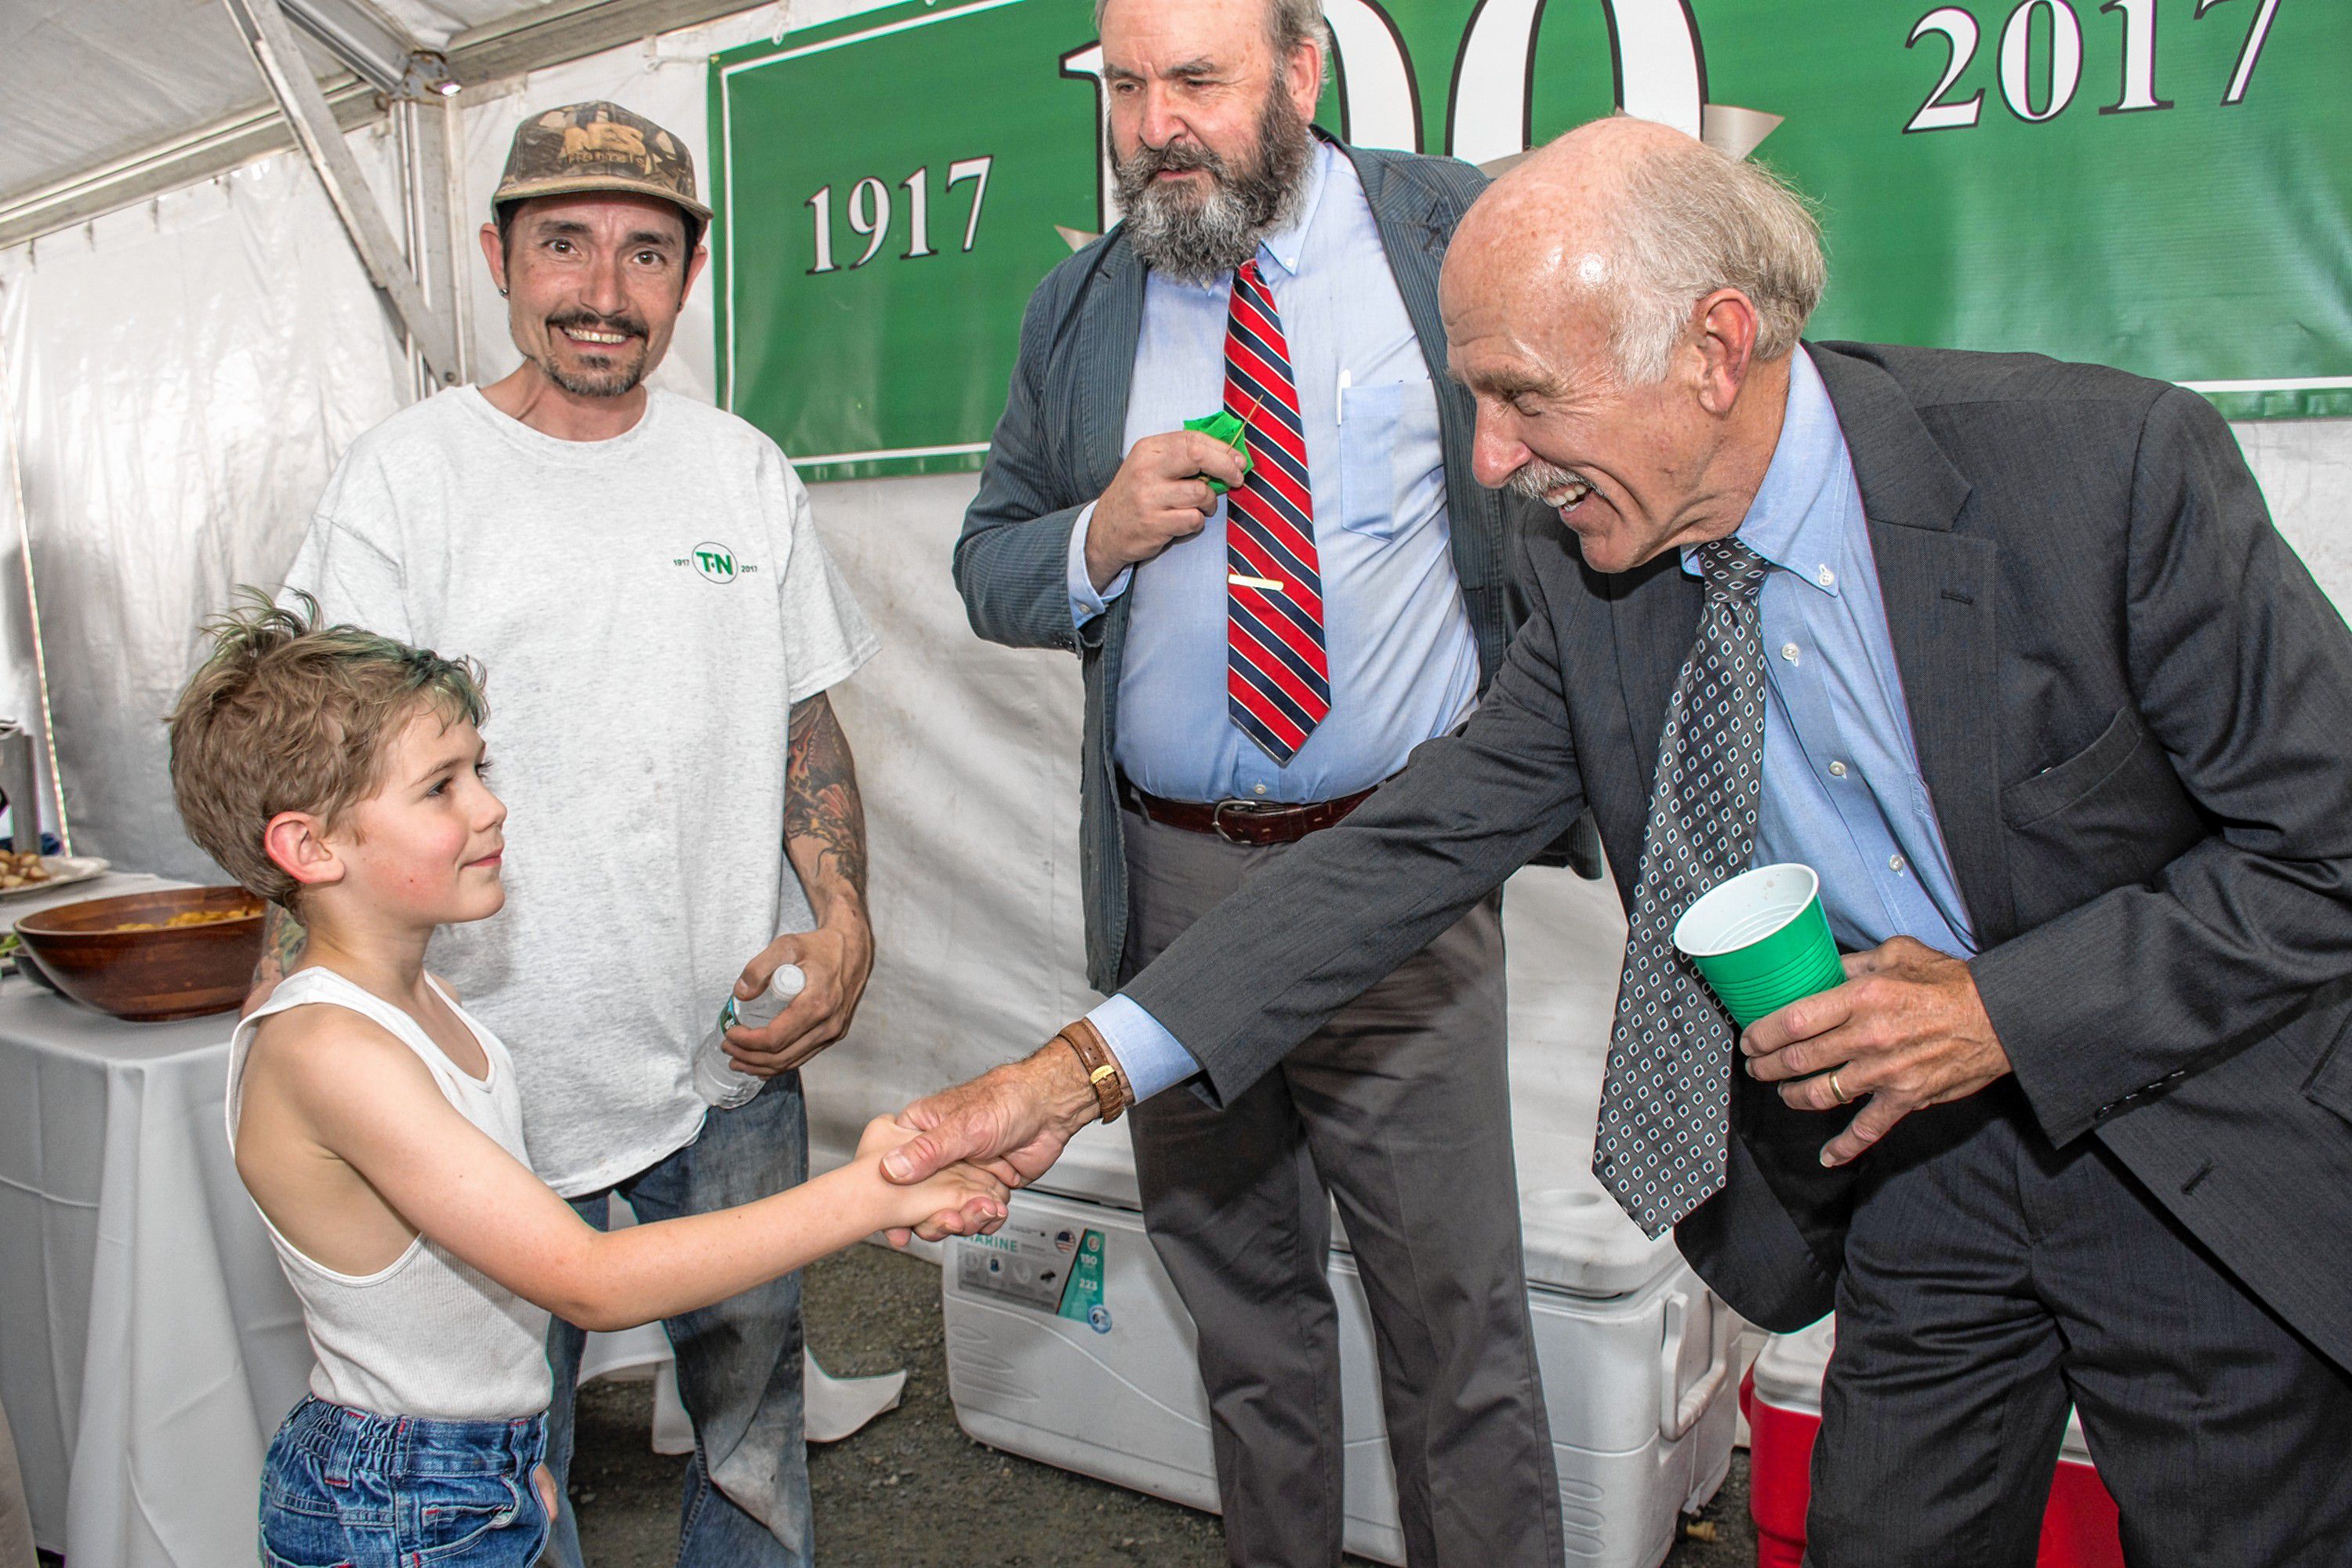 Owen Hoy, 9, shakes the hand of Trumbull-Nelson Construction Co. President Larry Ufford at the company's 100th anniversary celebration in Hanover, N.H., on May 18, 2017. Owen's father Steve Hoy has been with the company for four years. Owen Hoy told Ufford he wants to work at Trumbull-Nelson. "I want to build stuff," Hoy said. "Sign him up," Ufford said. (Nancy Nutile-McMenemy photograph)